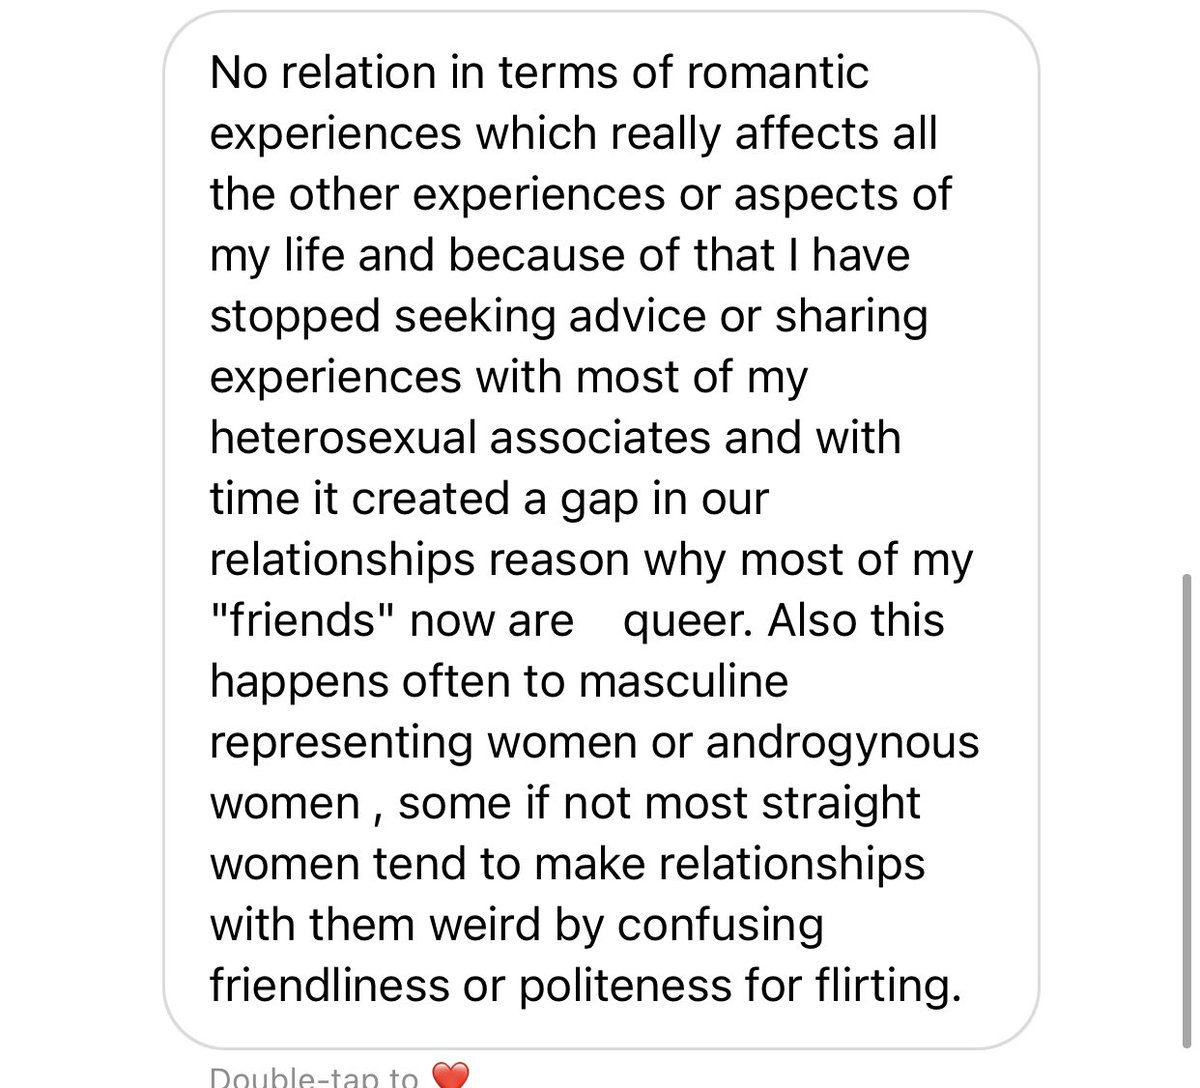 different romantic experiences and not feeling like straight women extend themselves to understand their queer friends